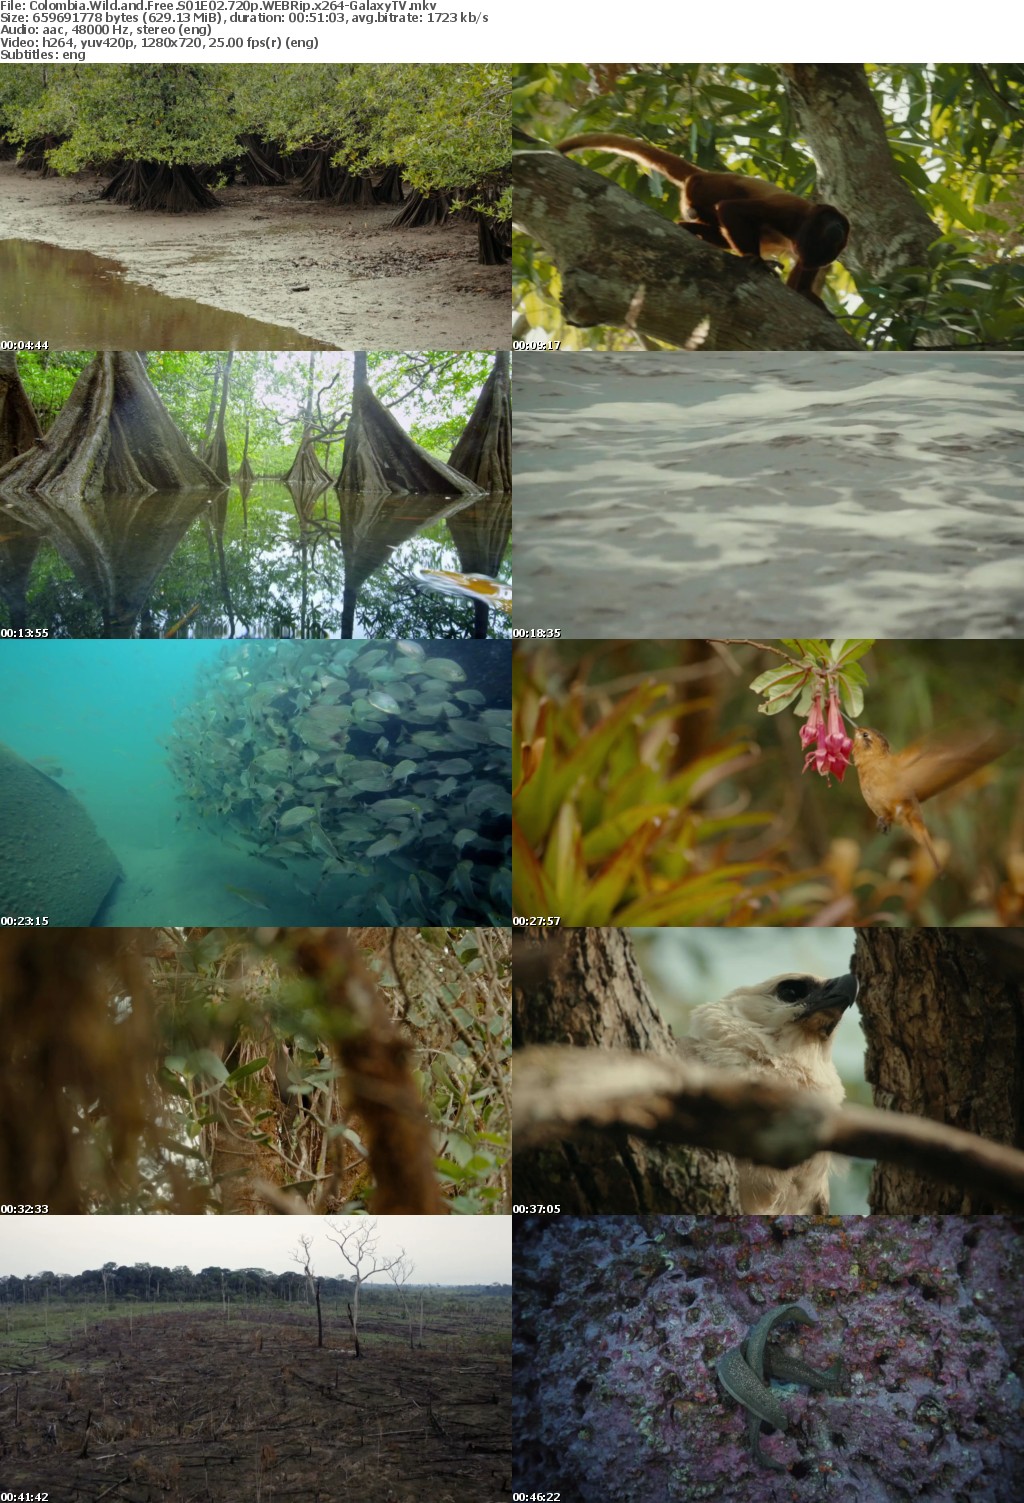 Colombia Wild and Free S01 COMPLETE 720p WEBRip x264-GalaxyTV